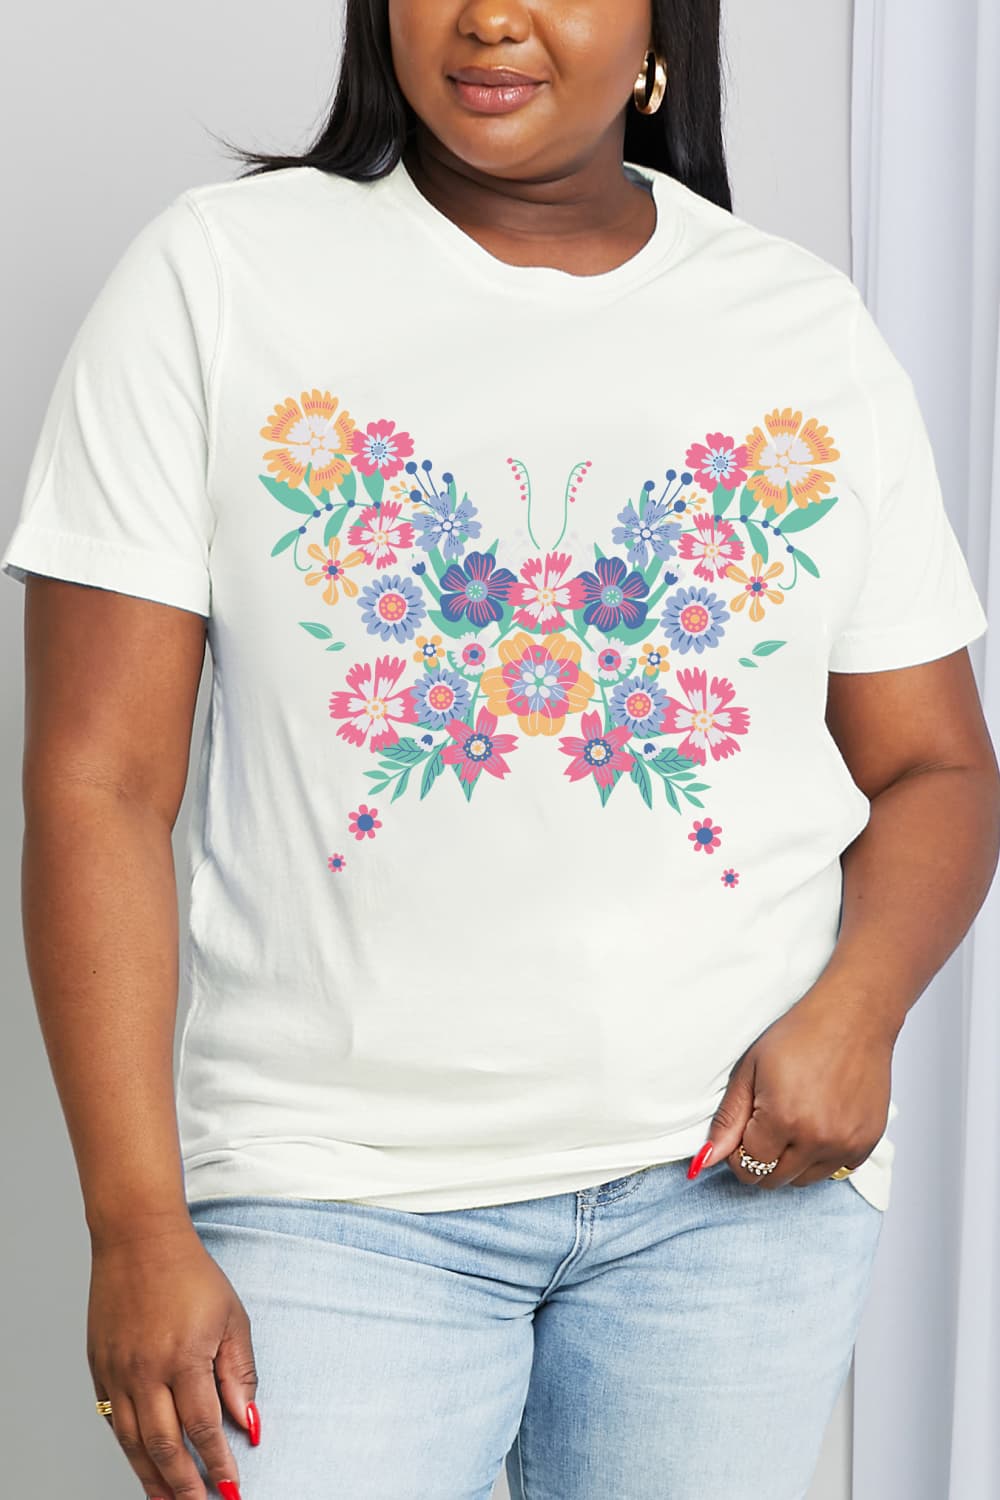 Simply Love Simply Love Full Size Flower Butterfly Graphic Cotton Tee - AllIn Computer